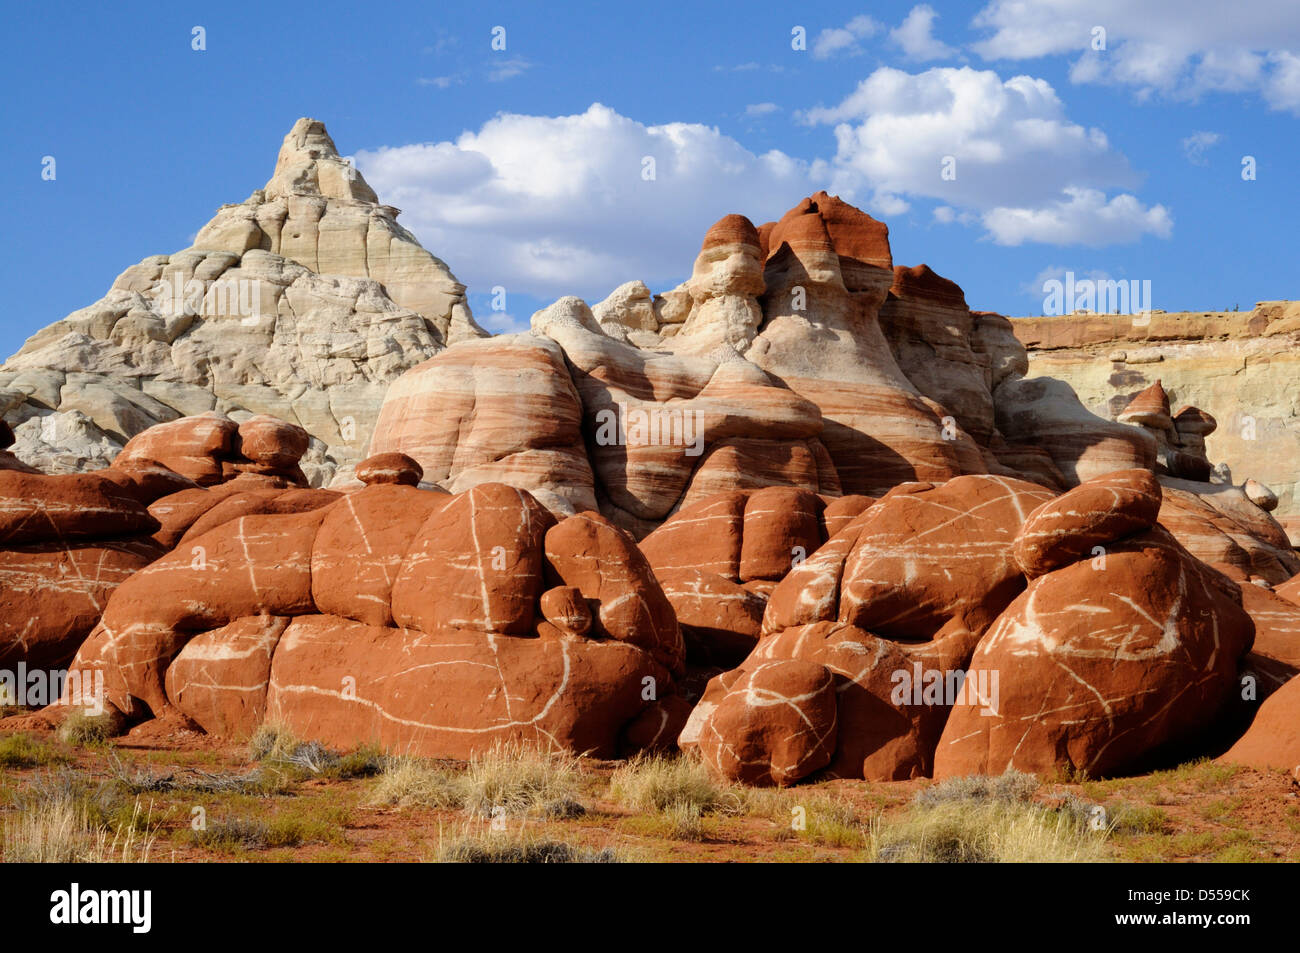 the breathtaking scenery of „Blue Canyon“ with it’s odd-shaped, colourful hoodoos, rock spires and sandstone formations, Arizona, USA Stock Photo